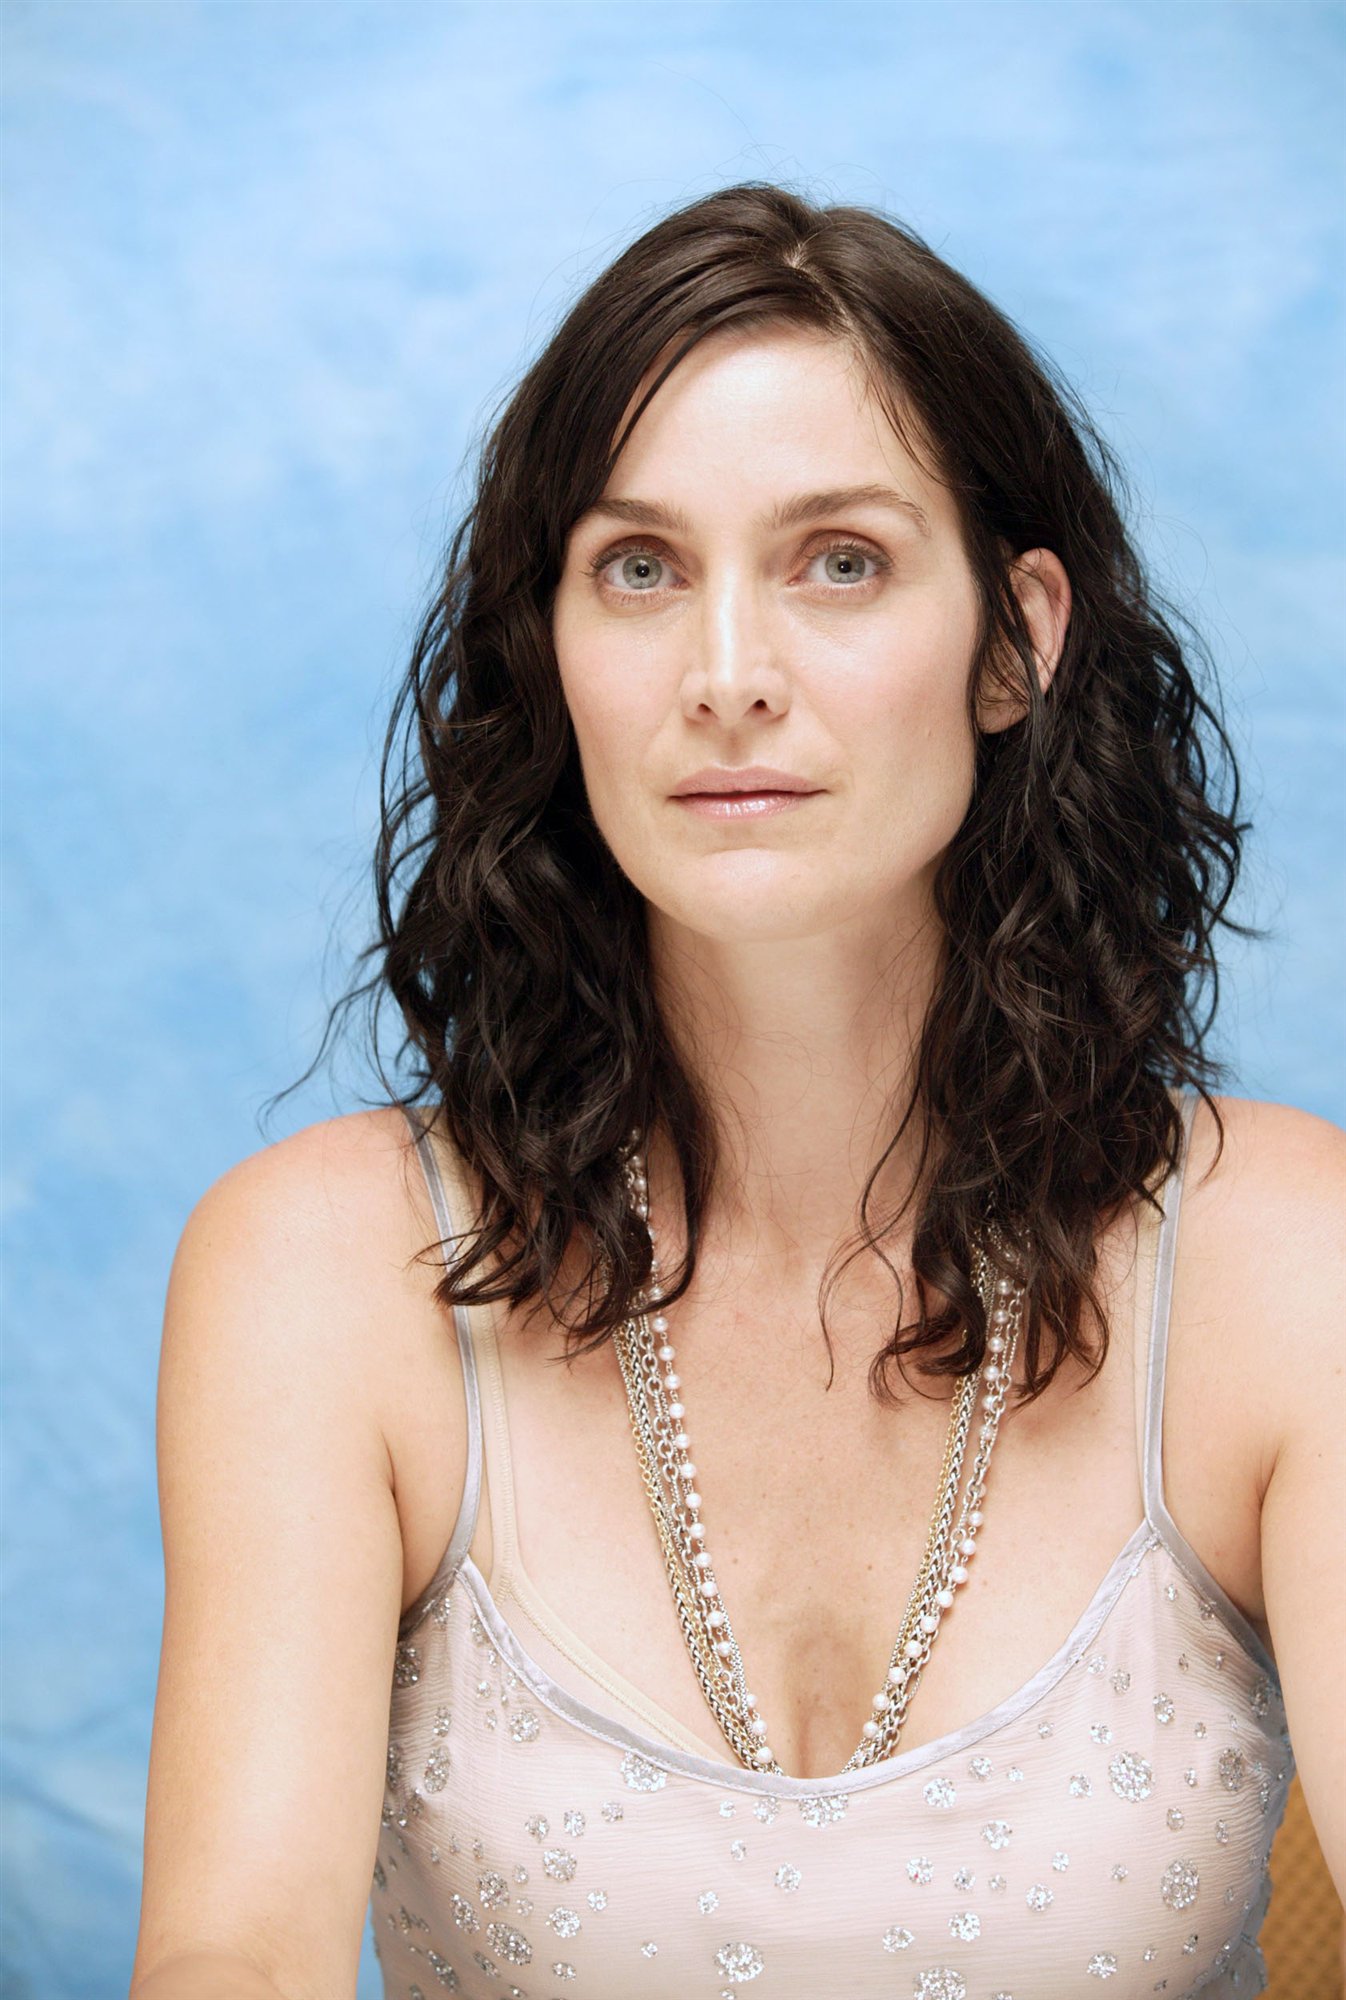 Carrie Anne Moss leaked wallpapers